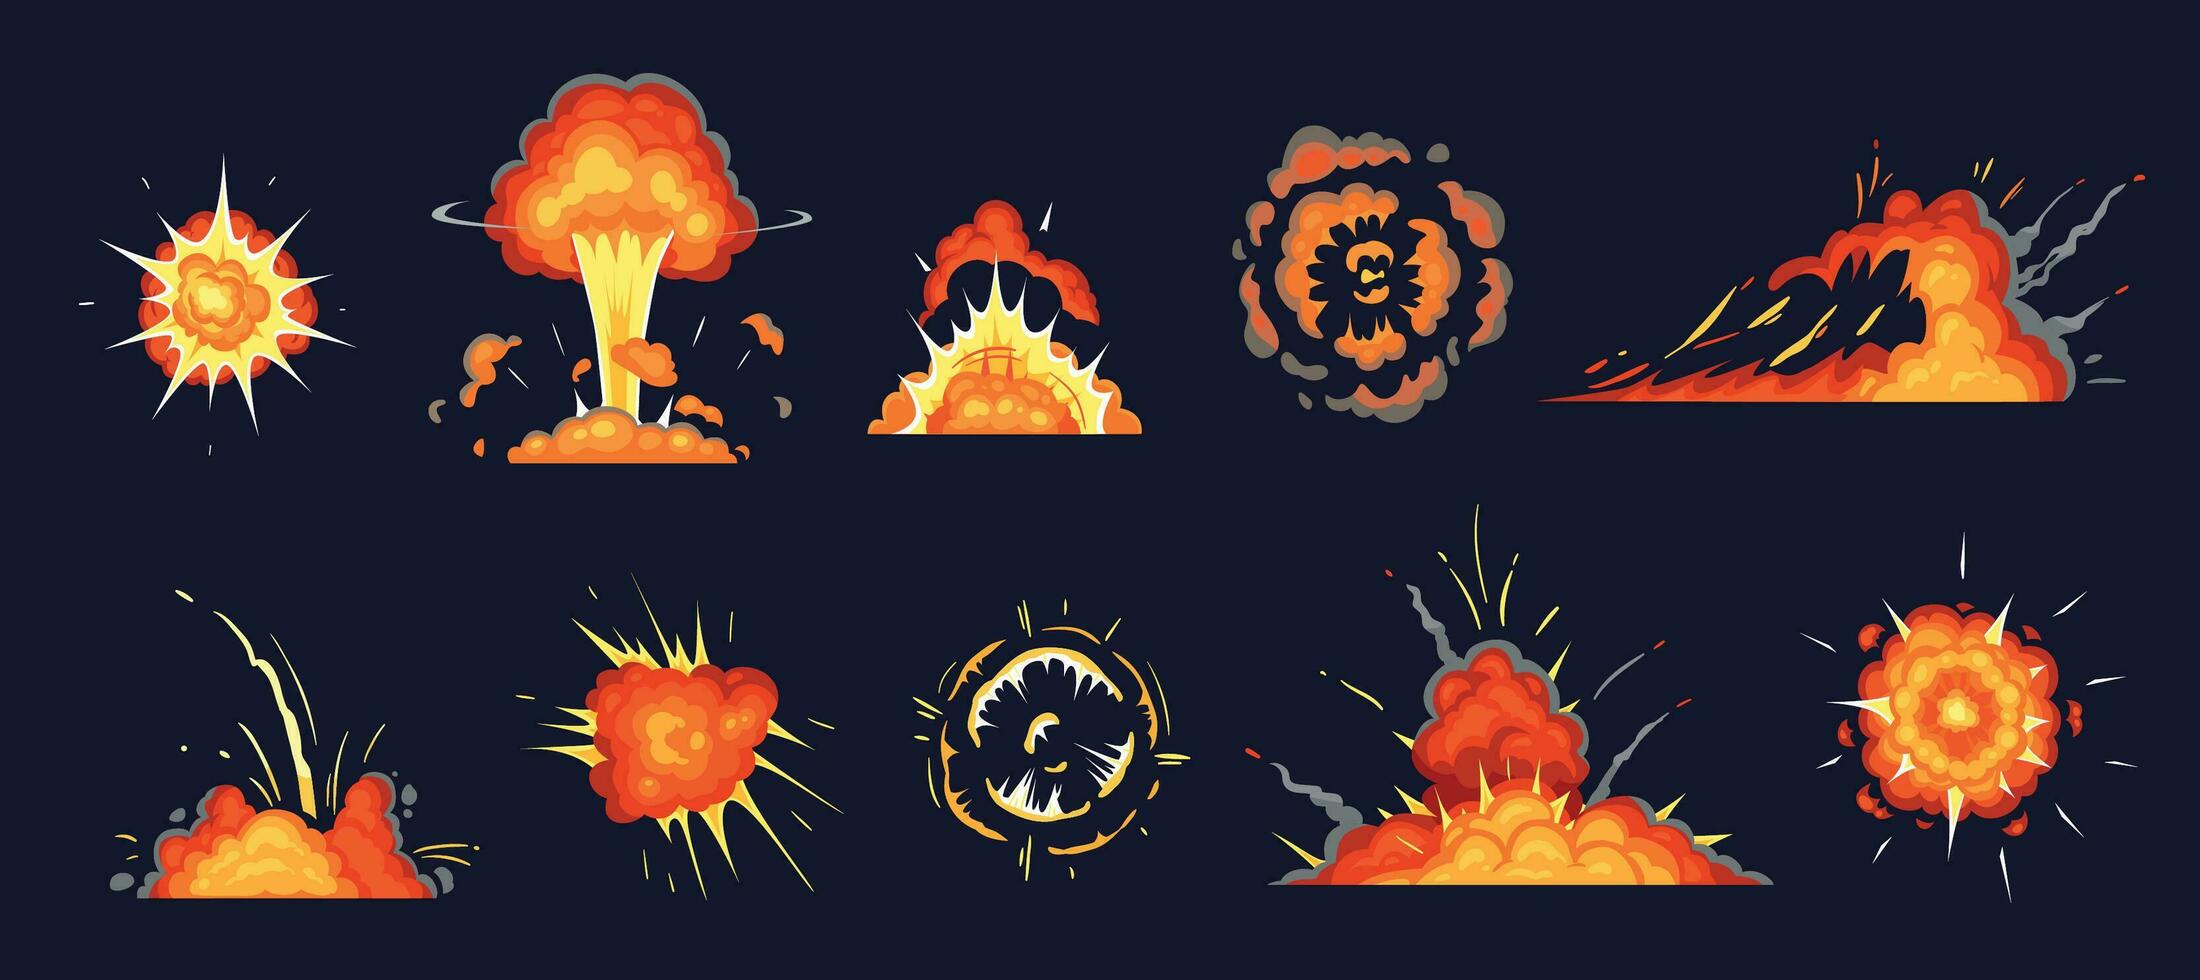 Cartoon explosion. Exploding bomb, atomic explode effect and comic explosions smoke clouds vector illustration set